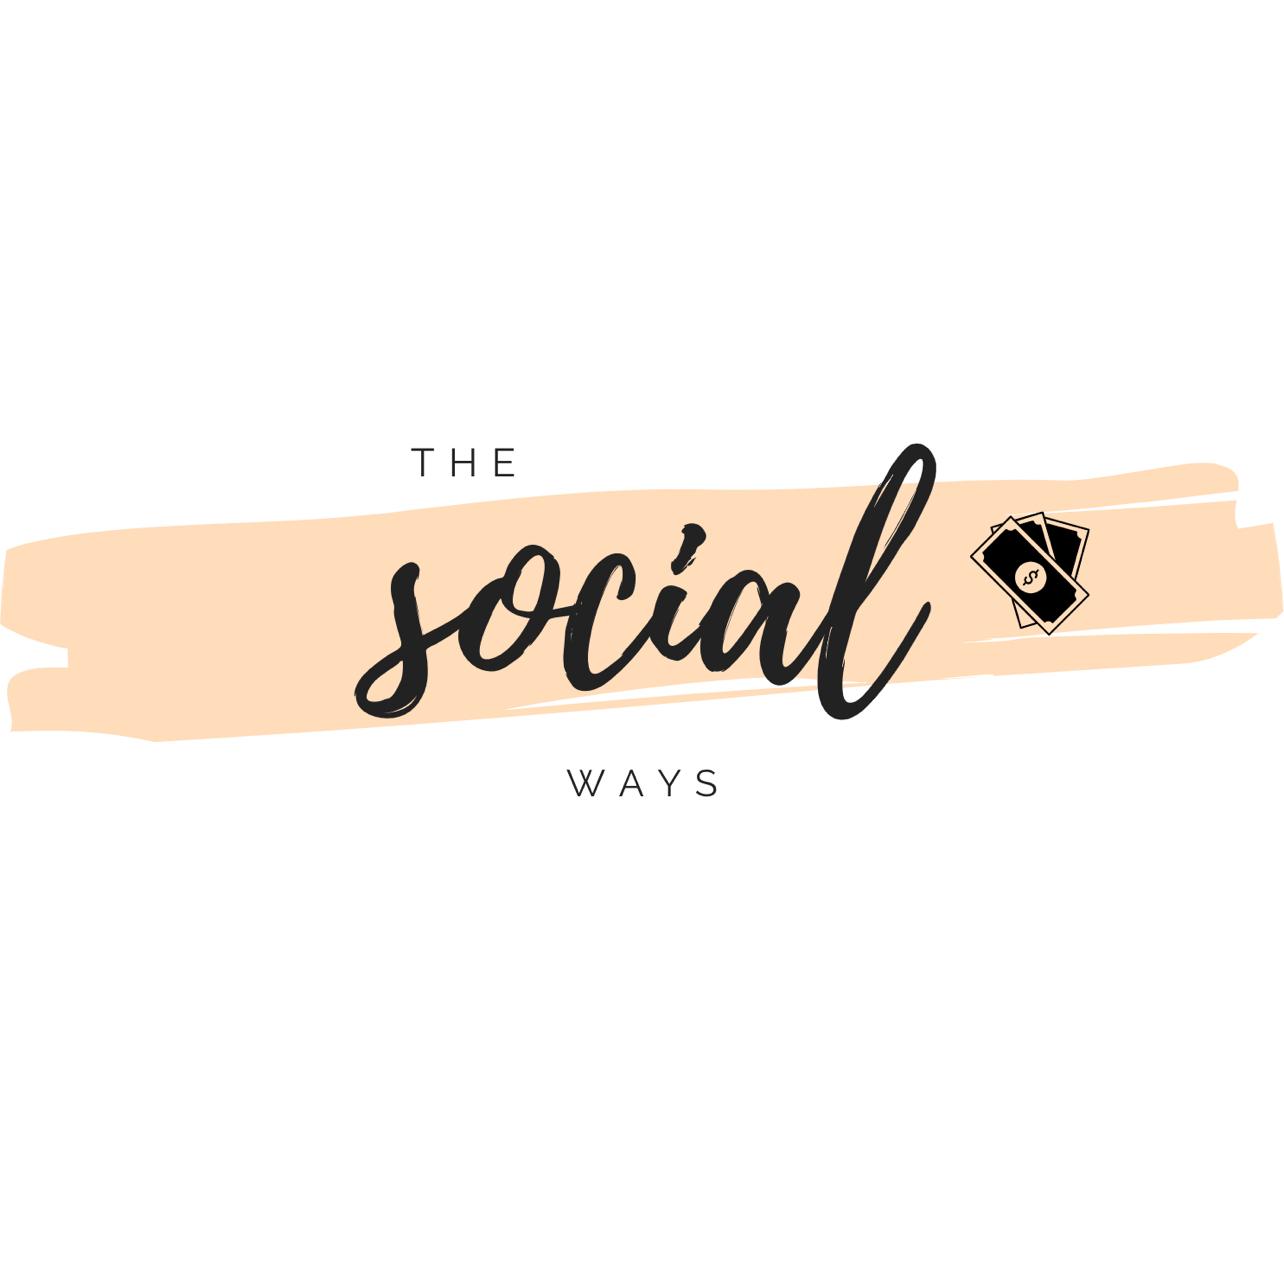 Social Ways's images